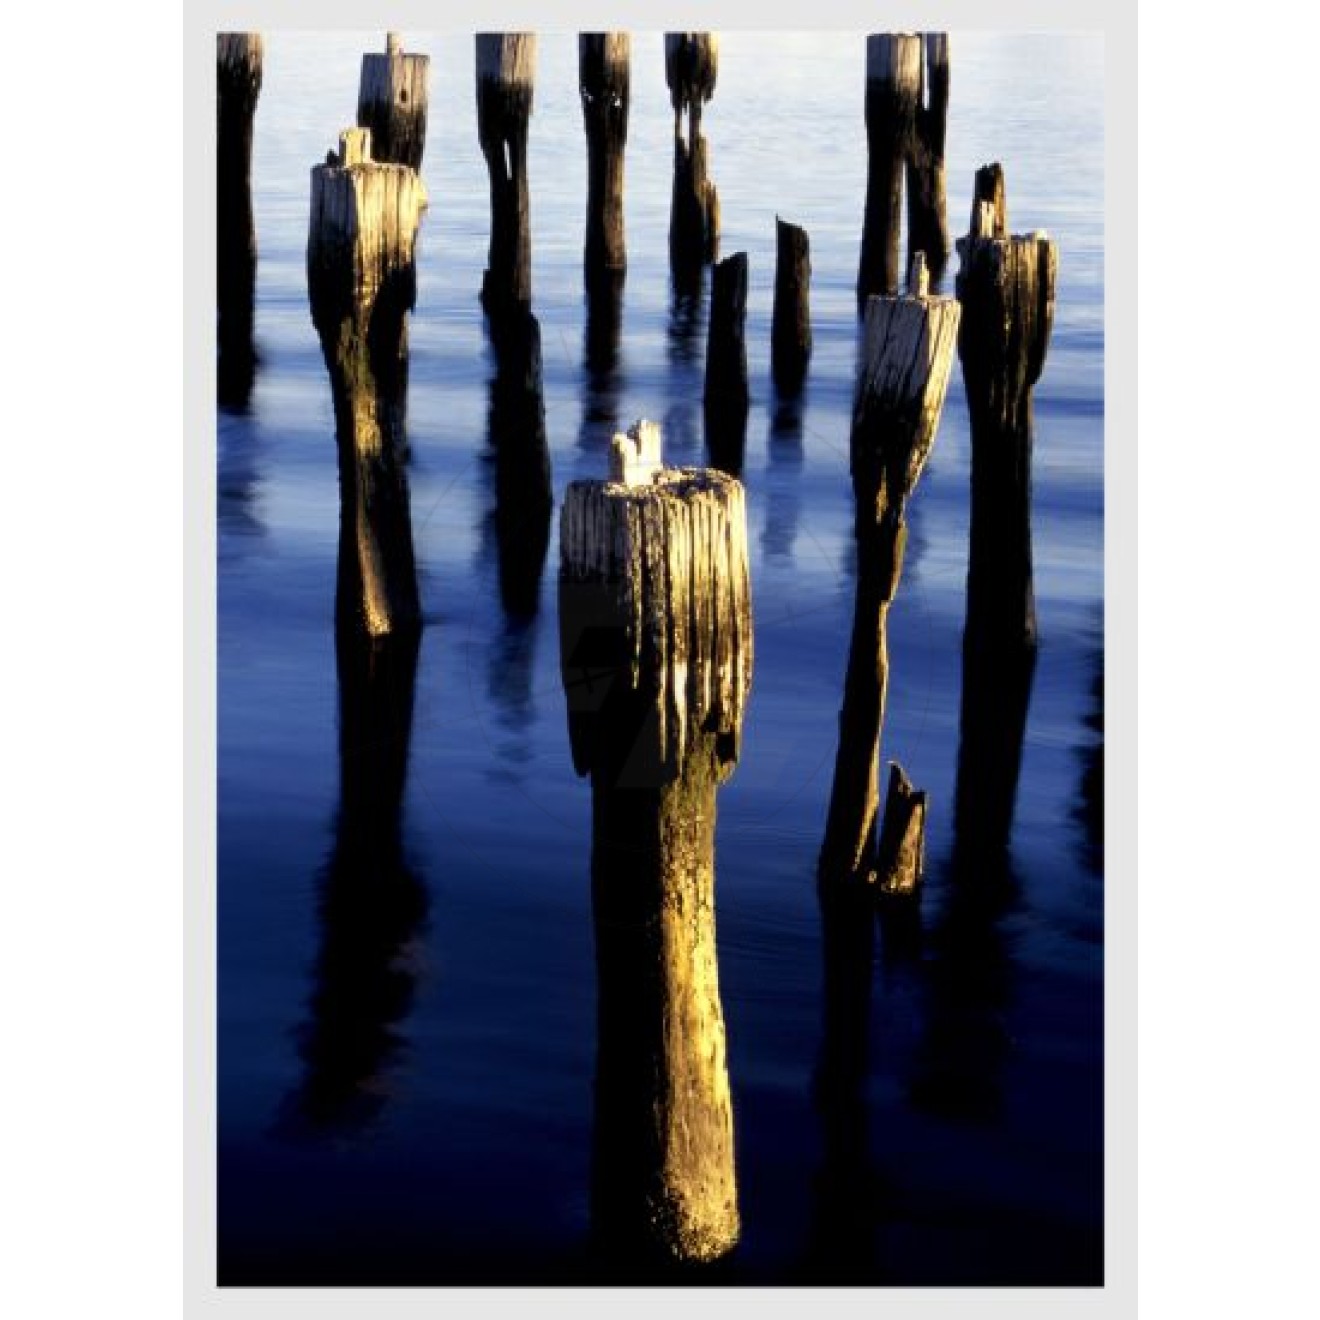 Posts in the water